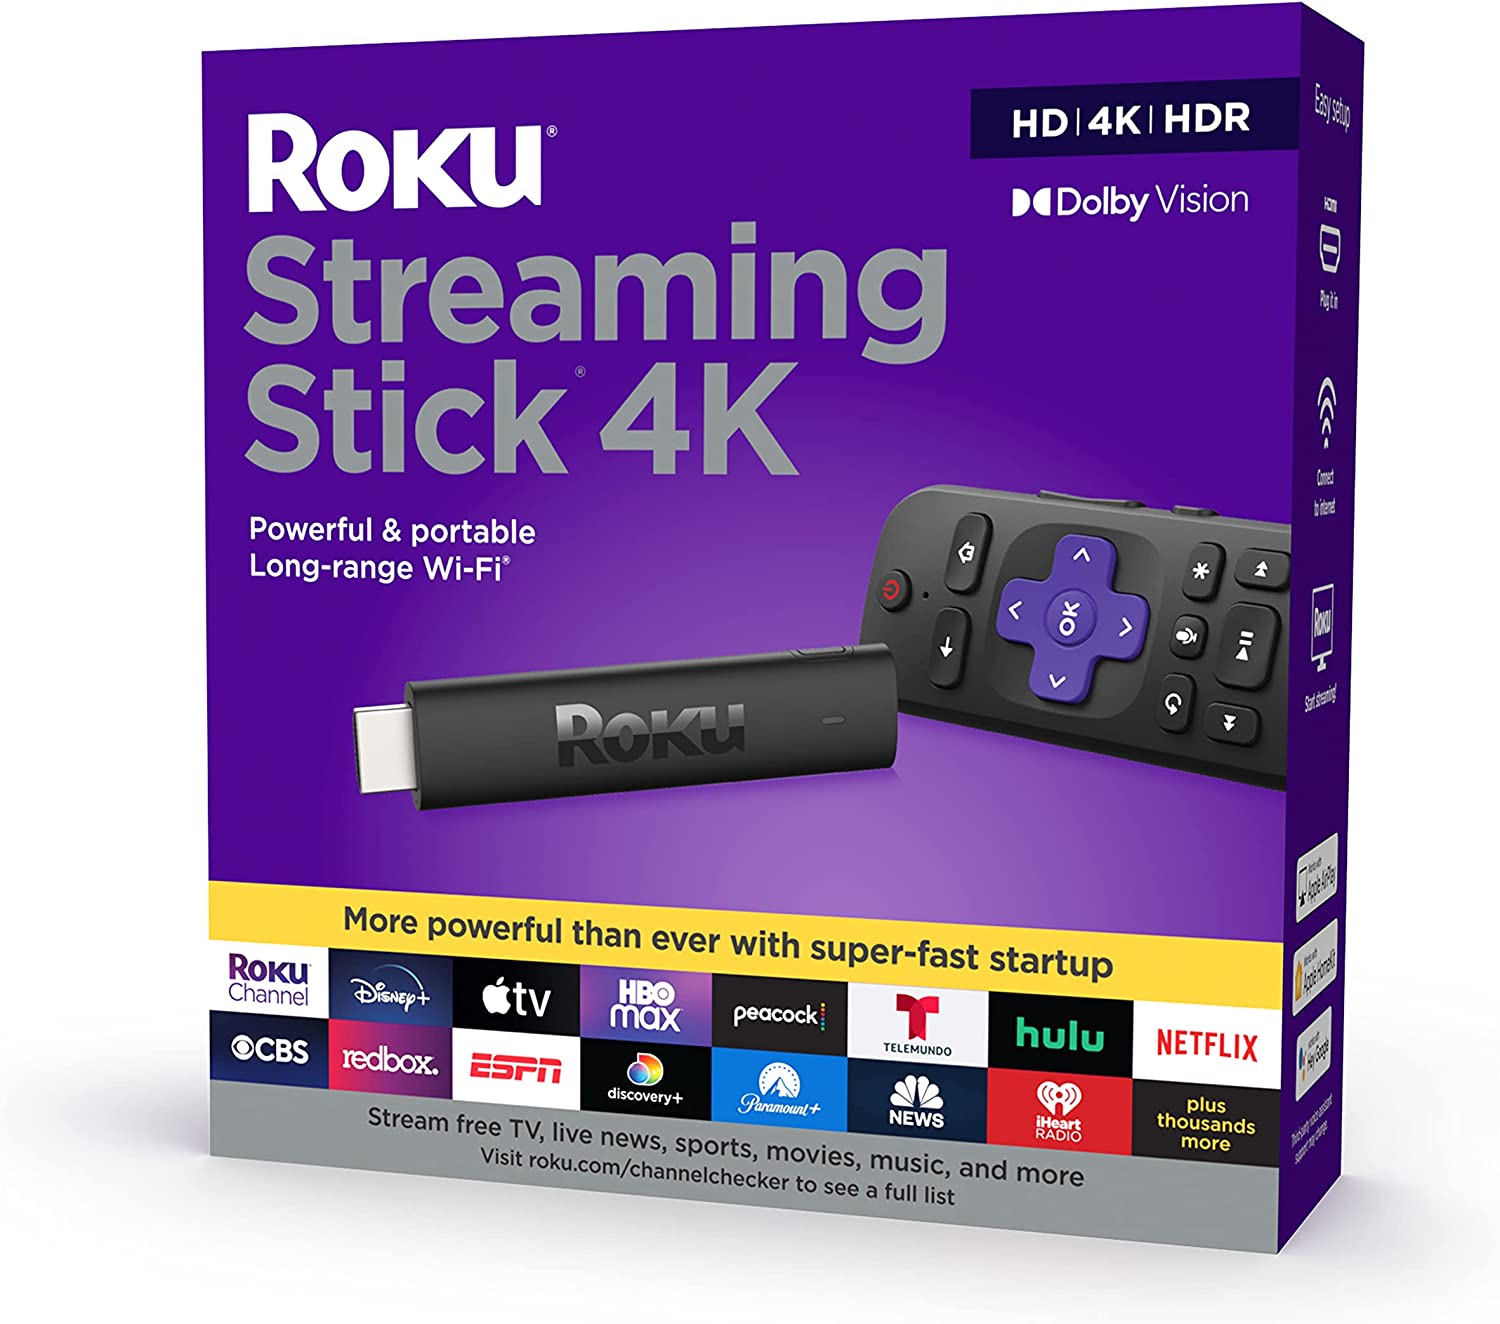 Get the Roku Streaming Stick 4K for just $25 right now